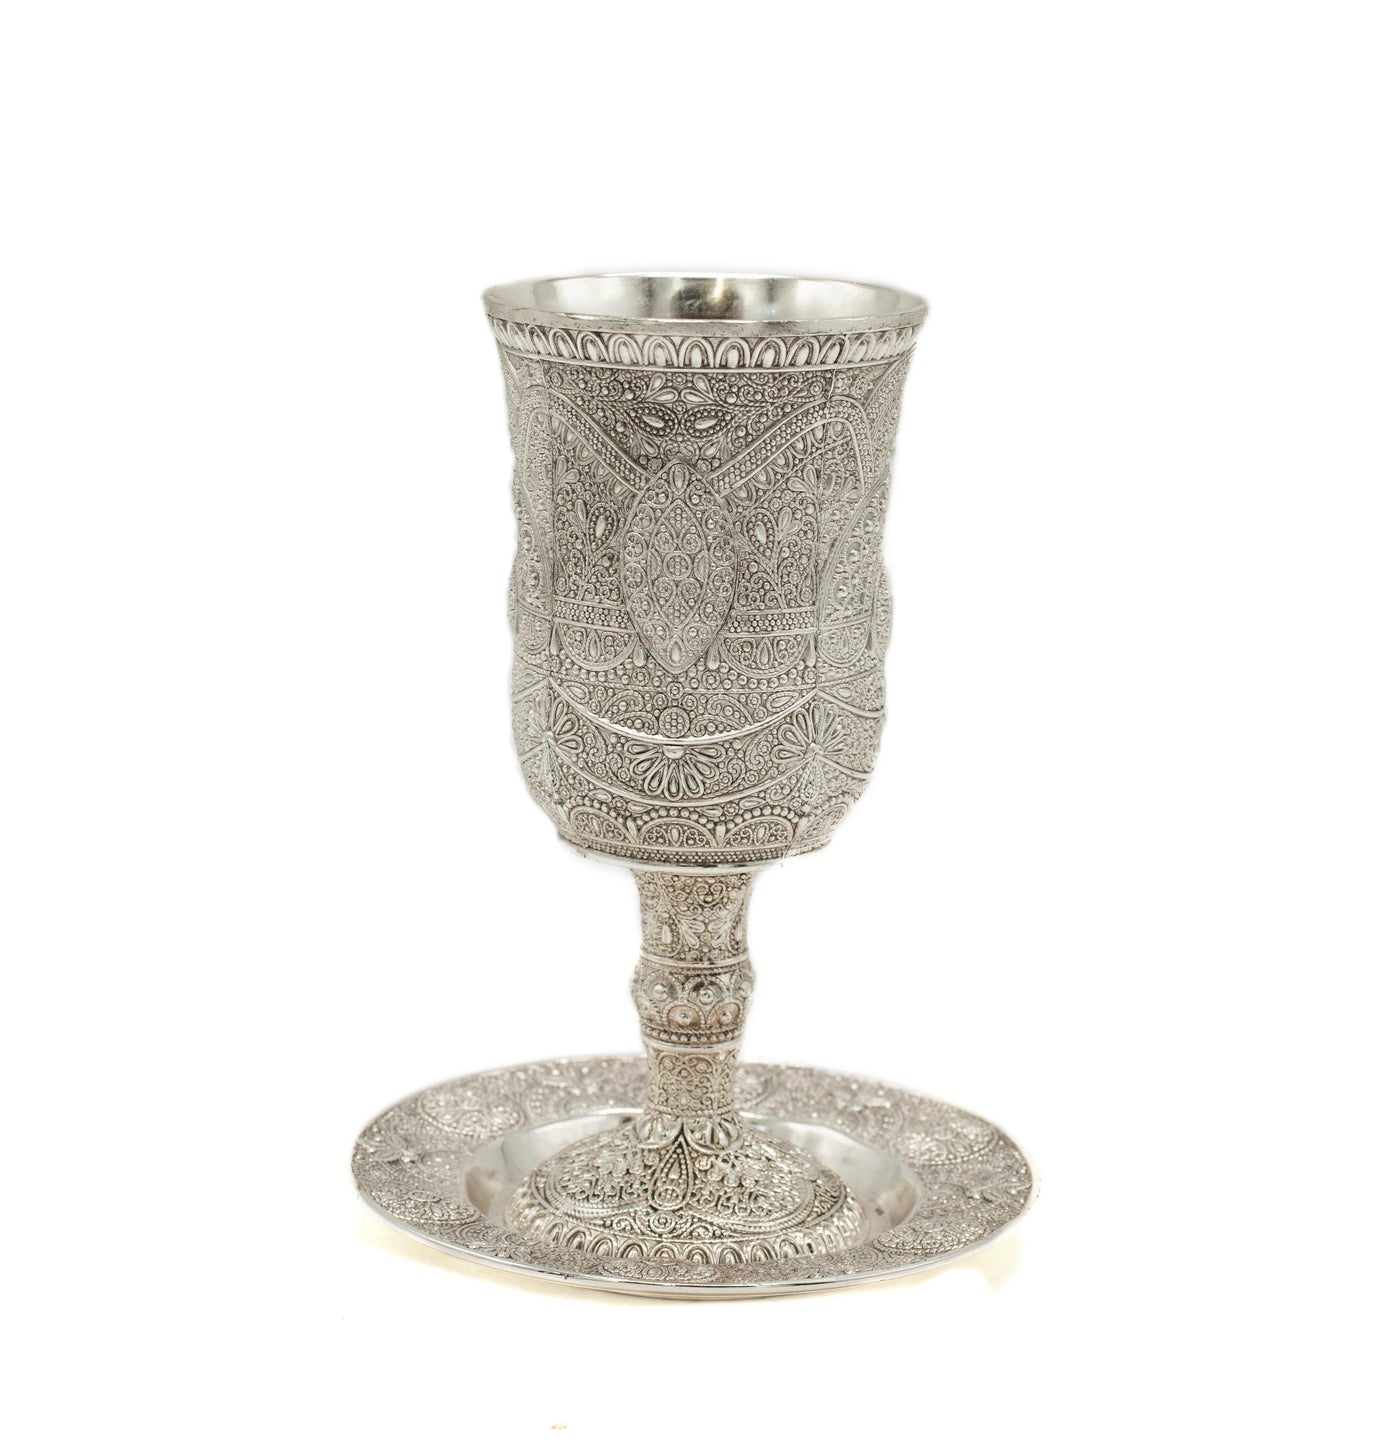 Shabbat Kiddush Metal Cup & Plate Silver Plated - Spring Nahal